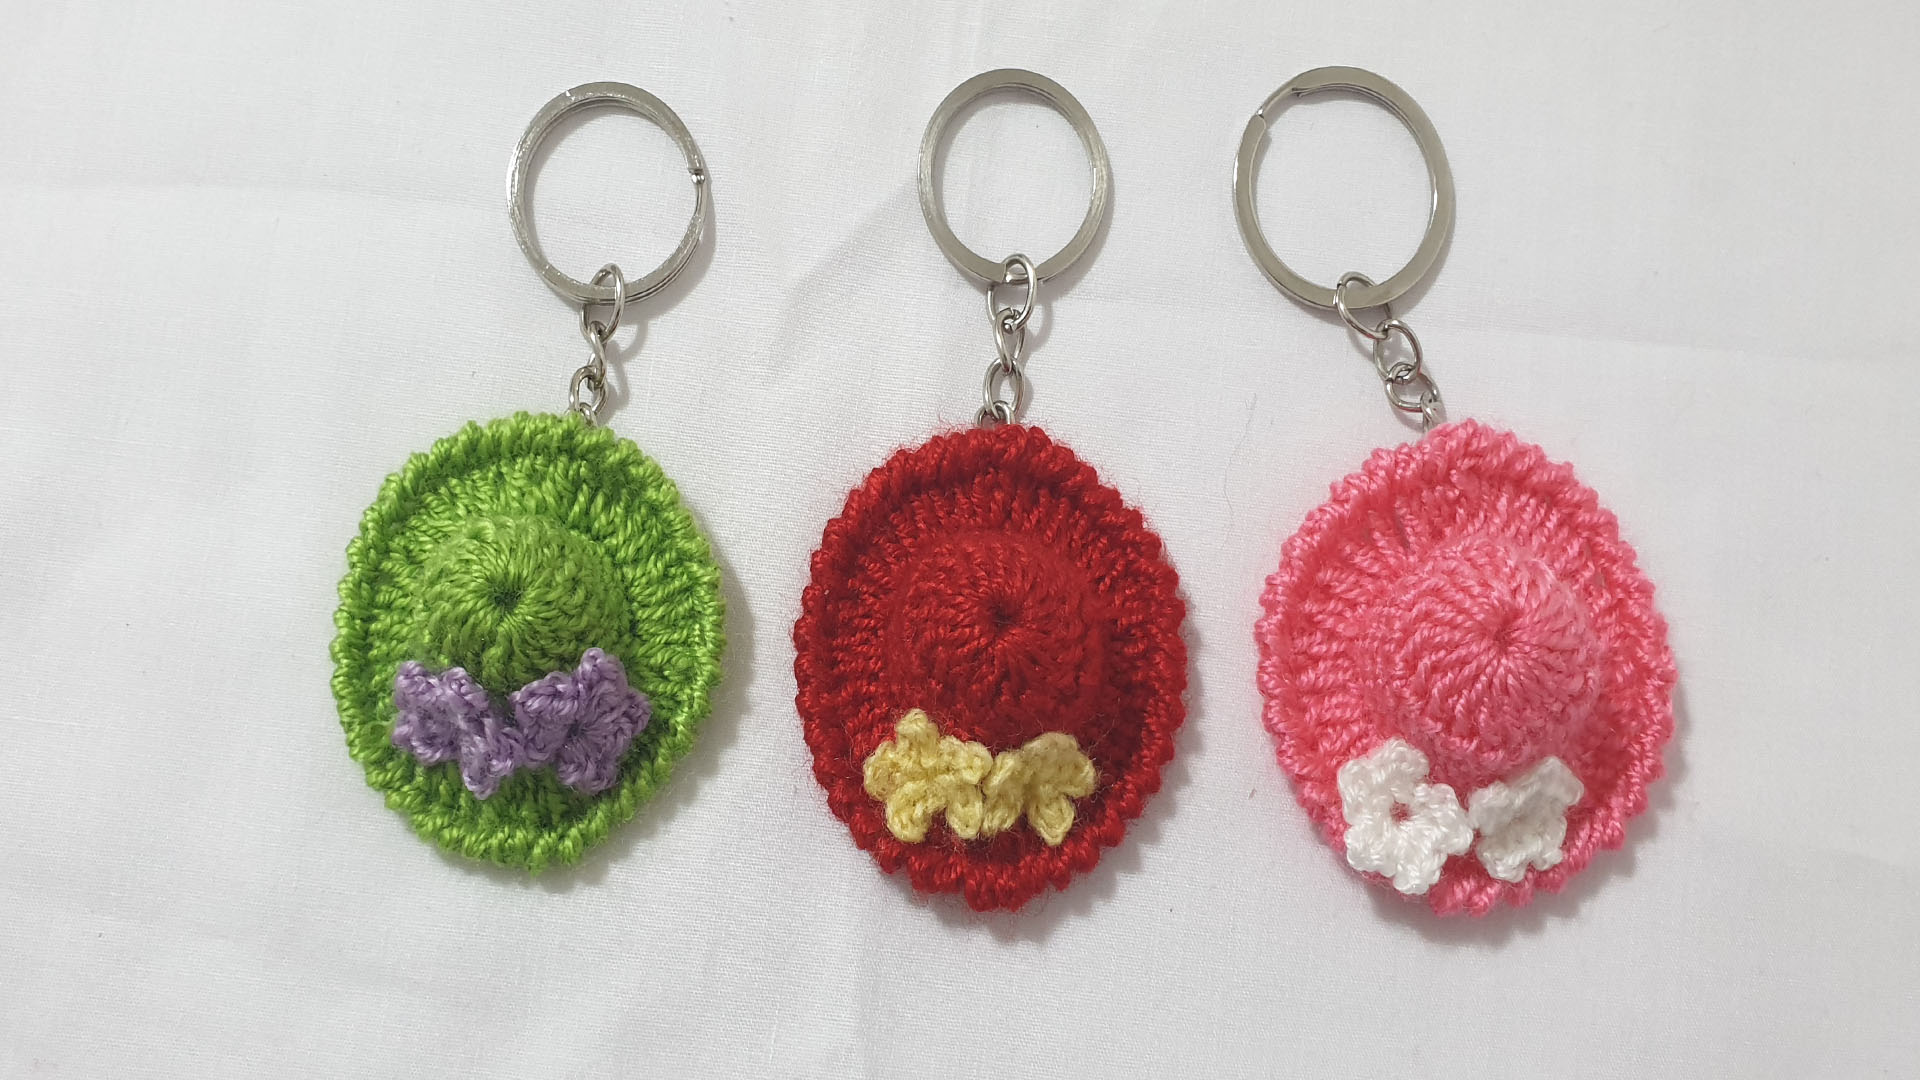 How to crochet hat key-chain